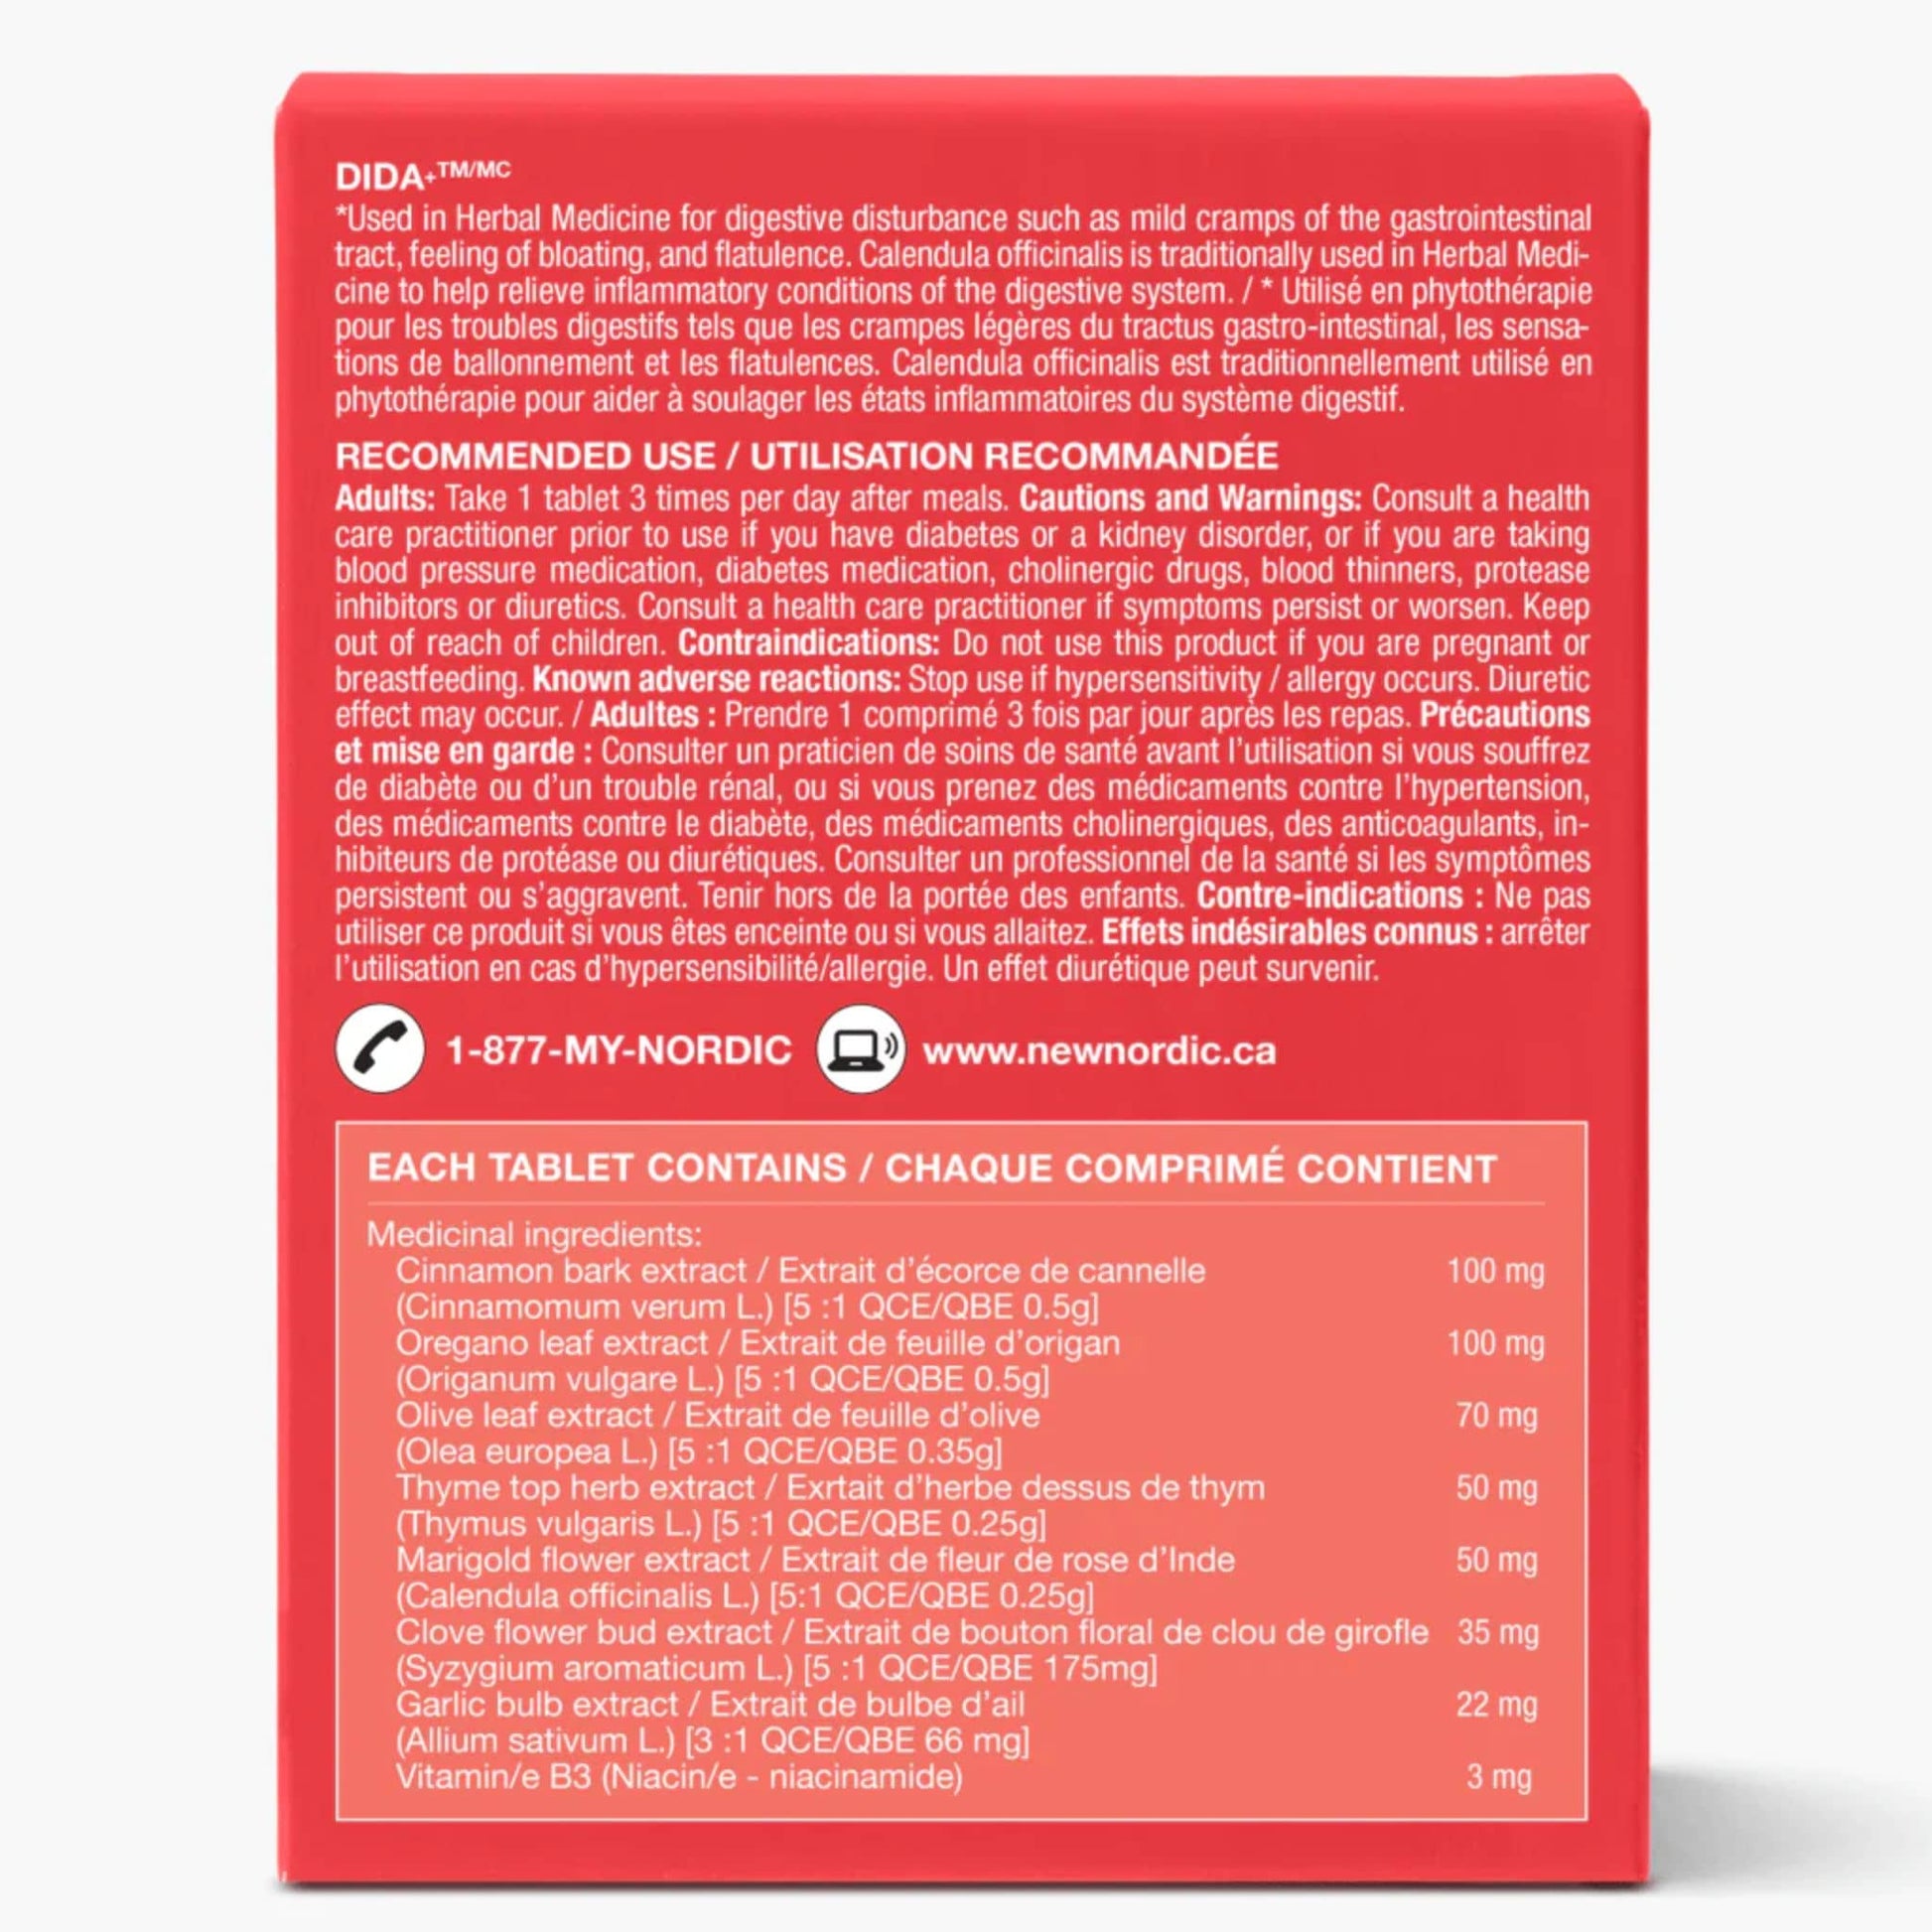 60 Coated Tablets | New Nordic Dida back of the box